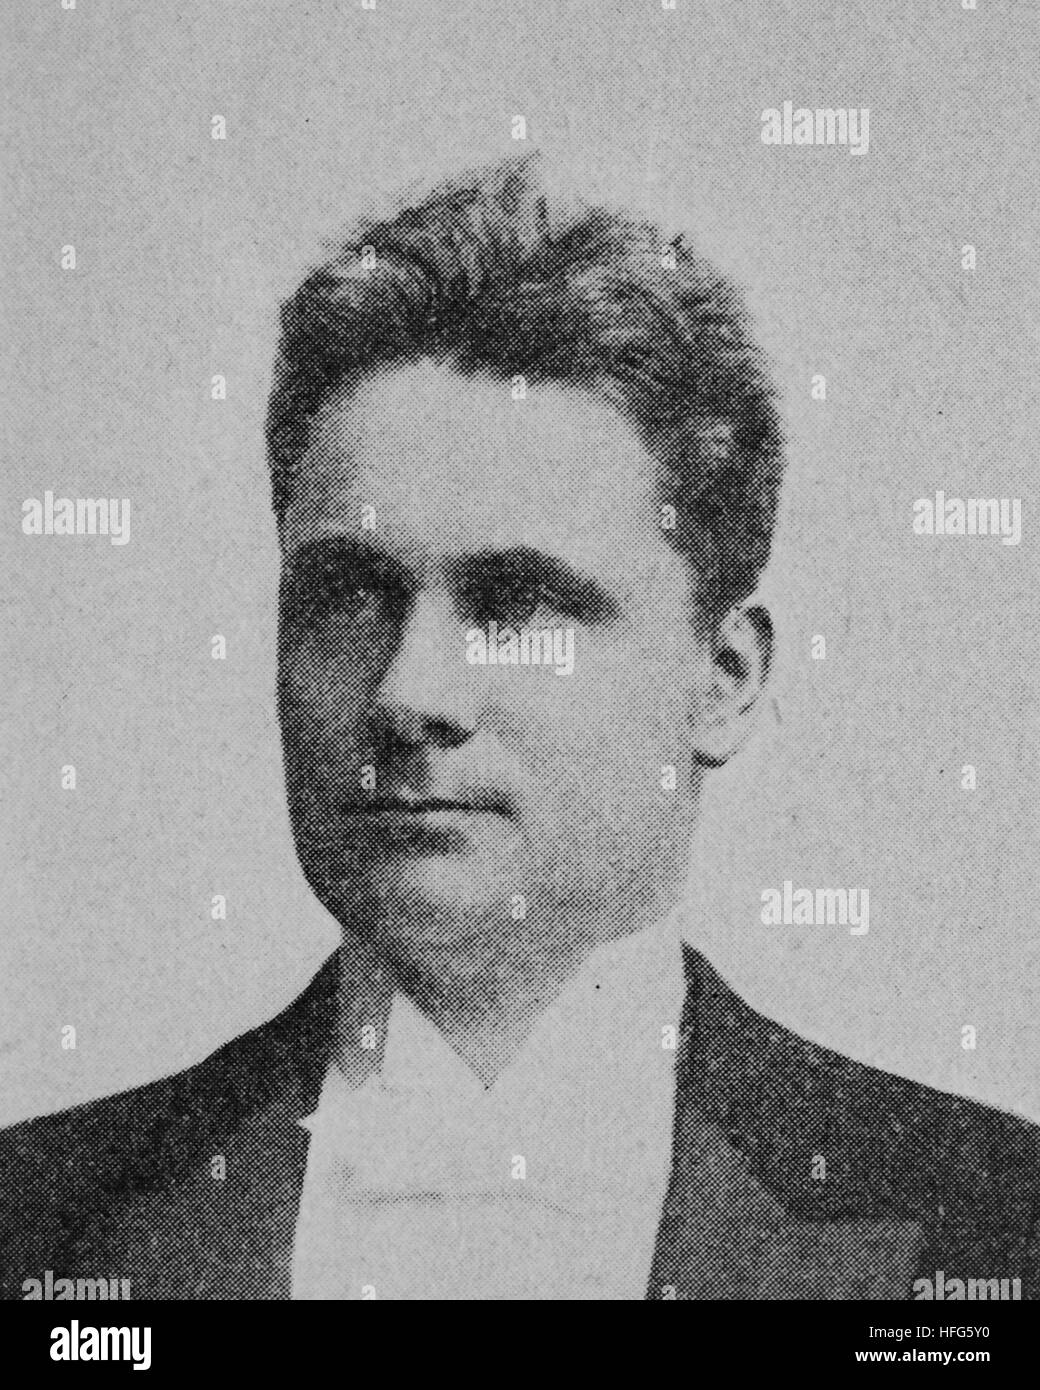 Hugo August Thimig, 1854 - 1944, although born in Germany, spent his working life in Austria as an actor, director, and director of the Burgtheater in Vienna., reproduction photo from the year 1895, digital improved Stock Photo